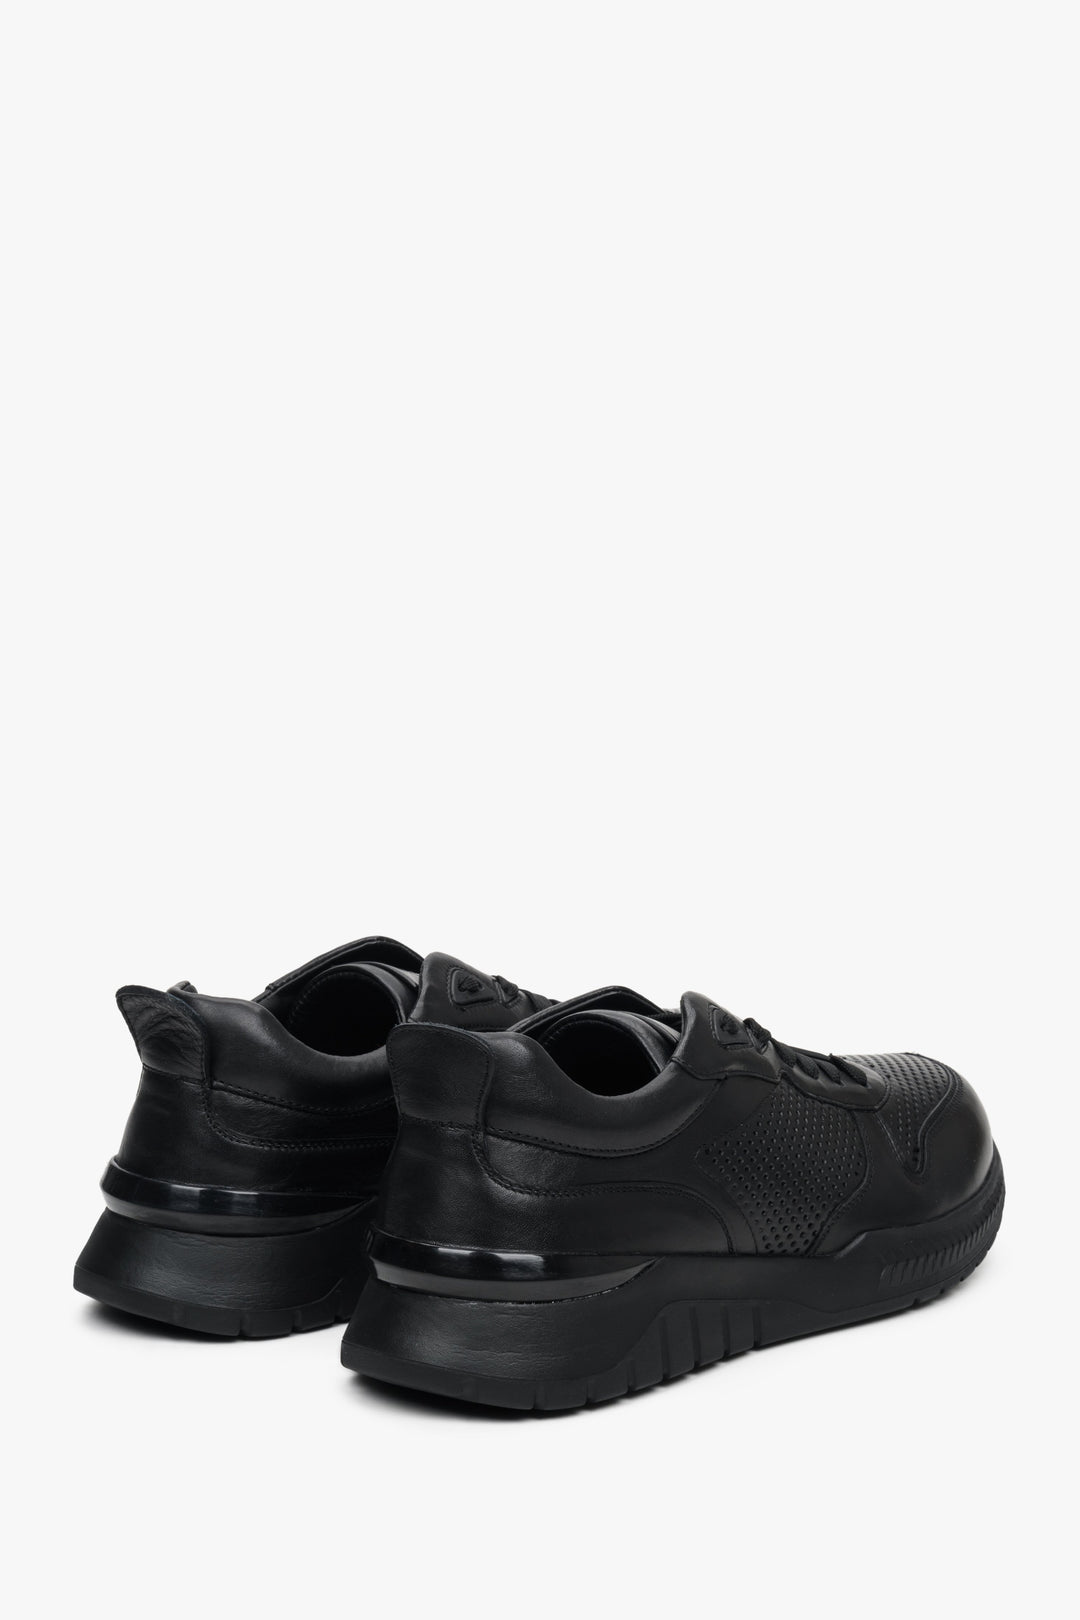 Men's natural leather sneakers in black for summer by Estro.